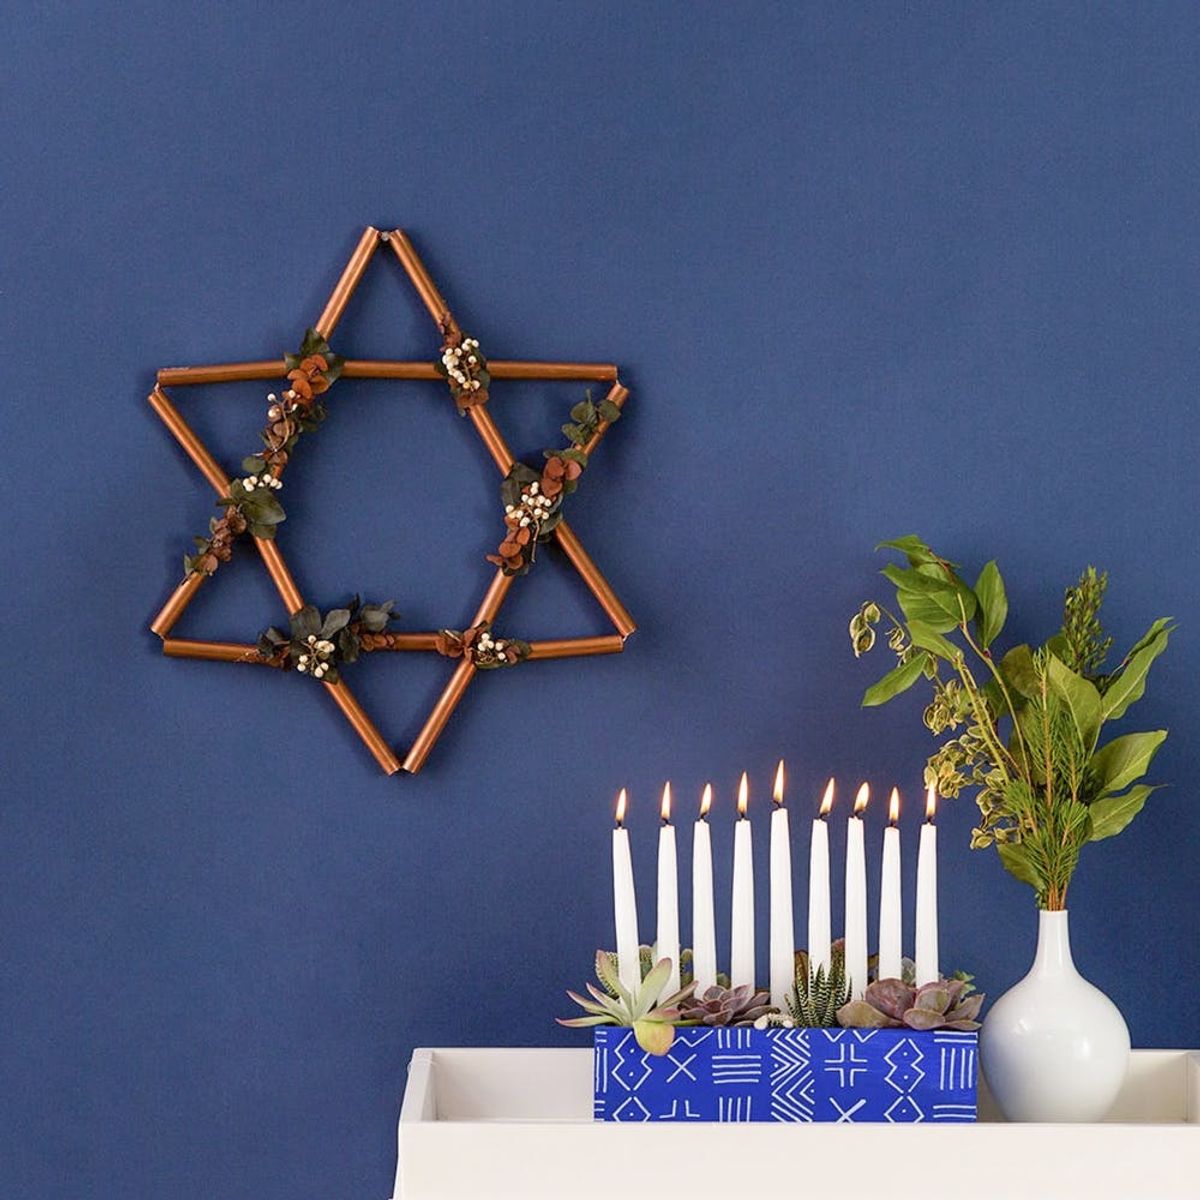 Adorn Your Mantle With This DIY Copper Star of David Hanukkah Wreath